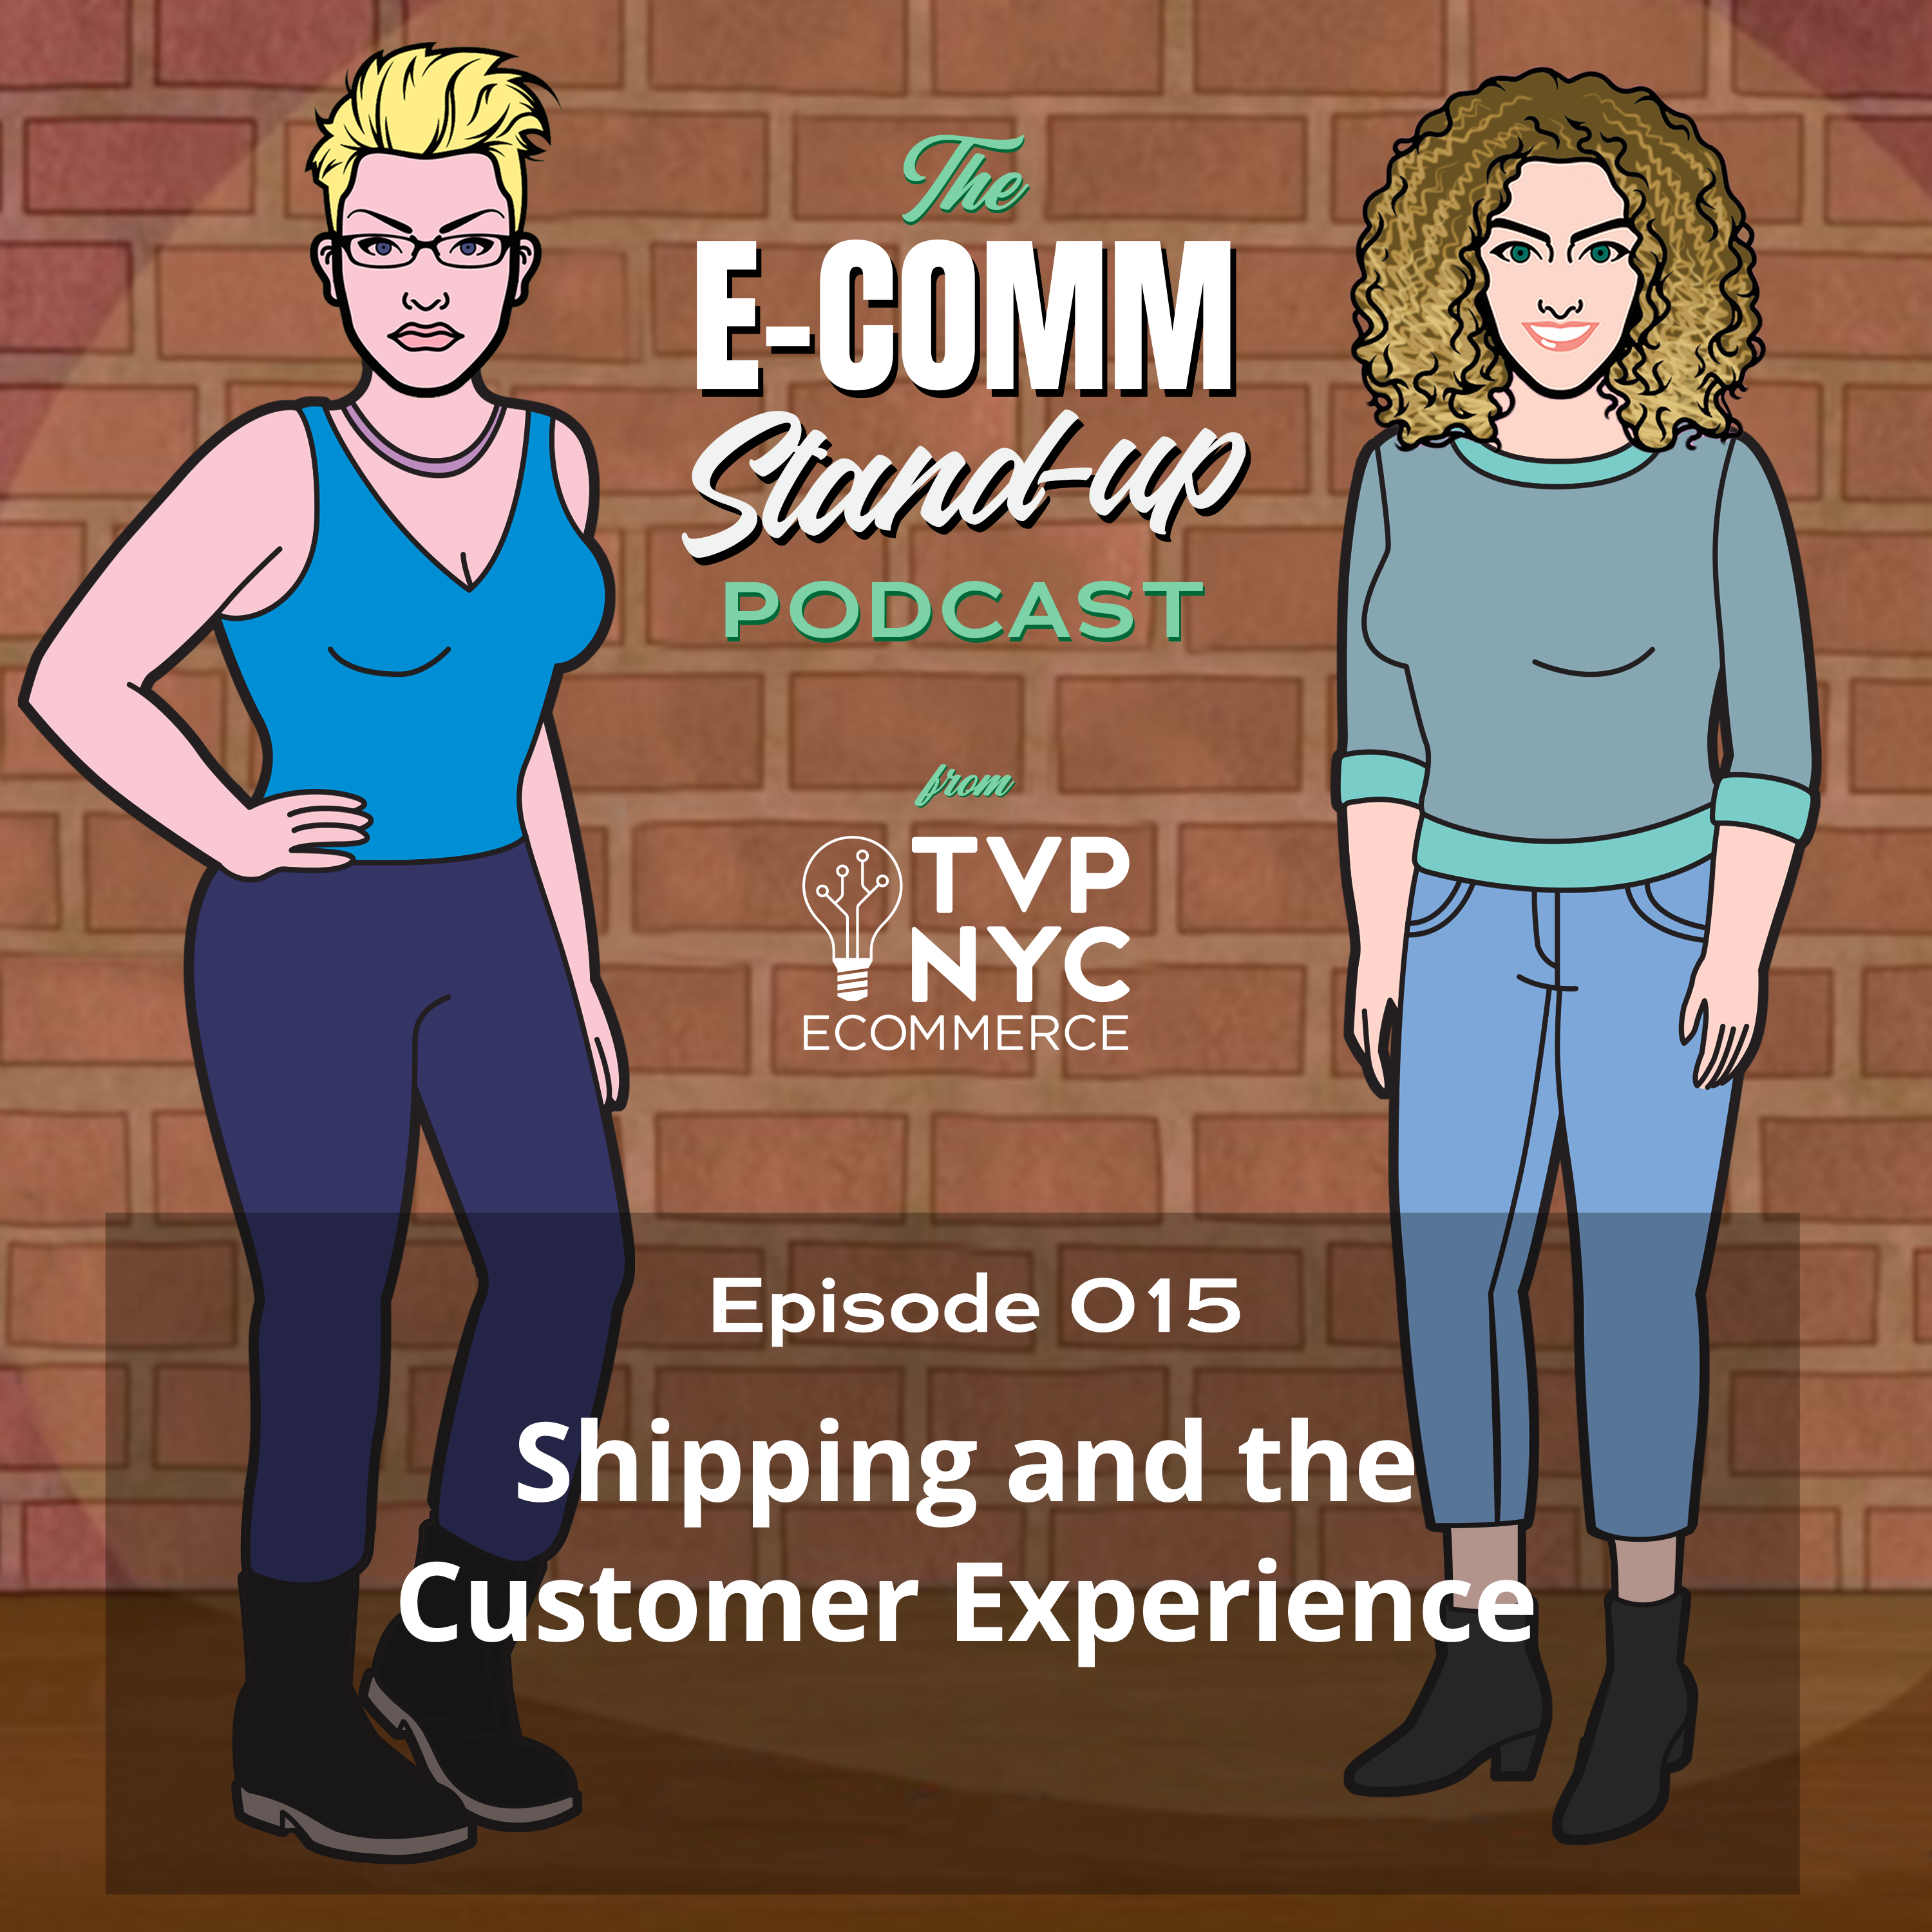 [PODCAST] Shipping and the Customer Experience